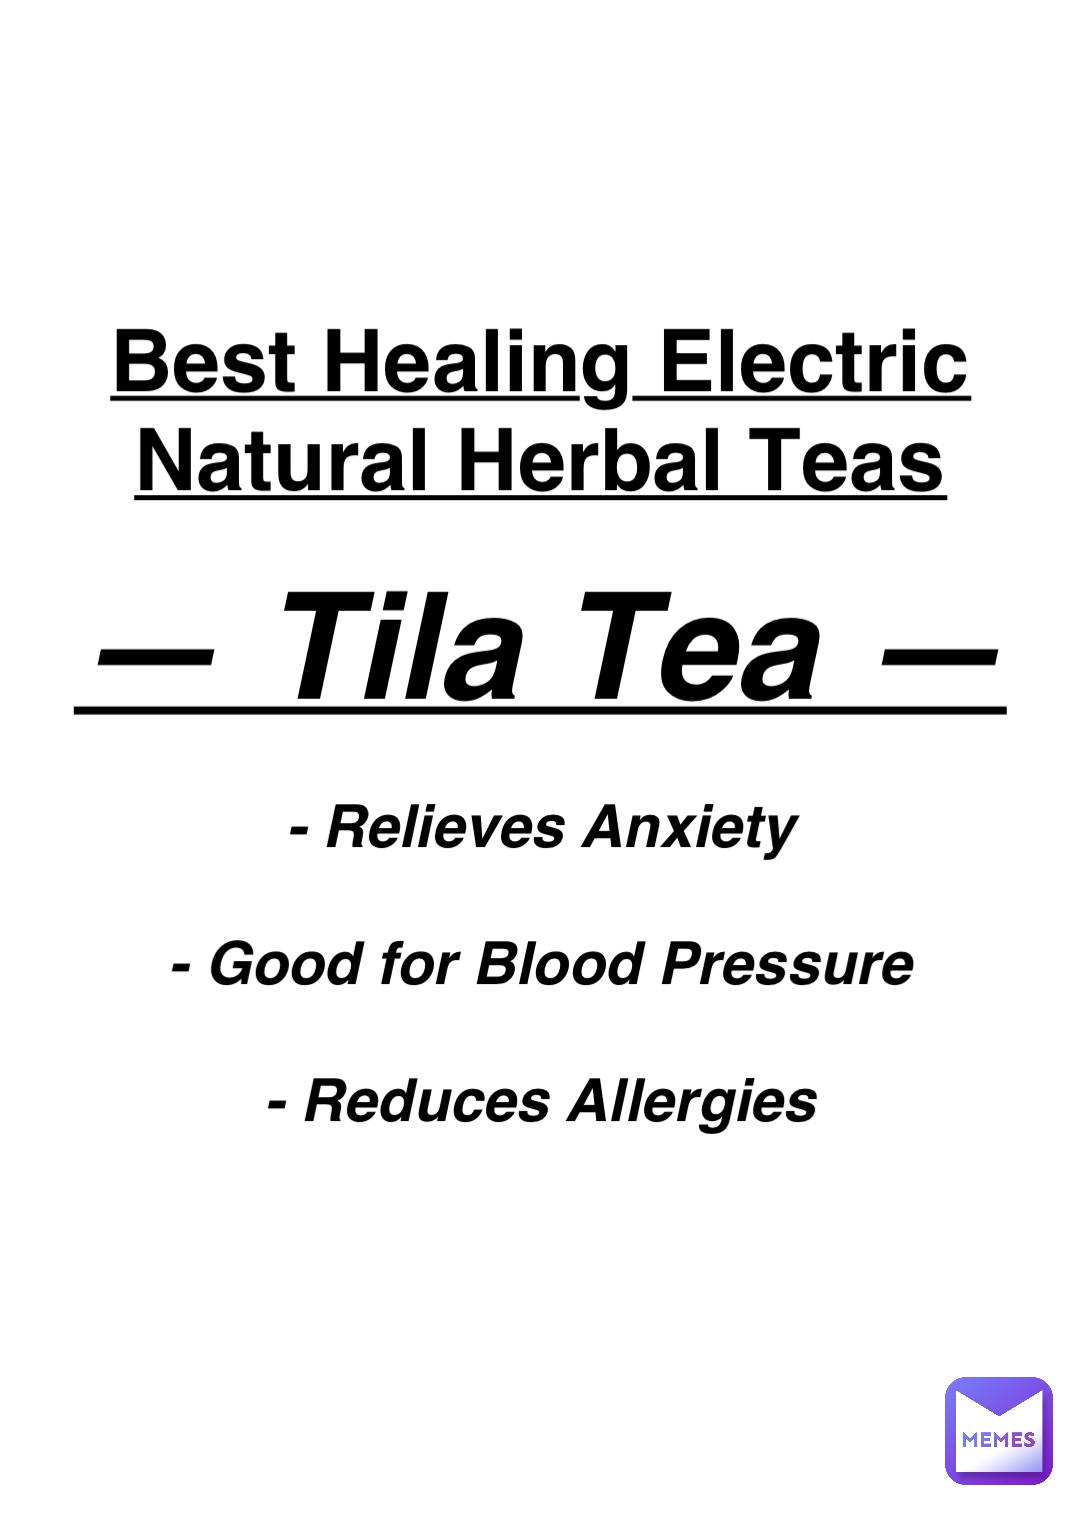 Double tap to edit Best Healing Electric
Natural Herbal Teas — Tila Tea — - Relieves Anxiety

- Good for Blood Pressure

- Reduces Allergies